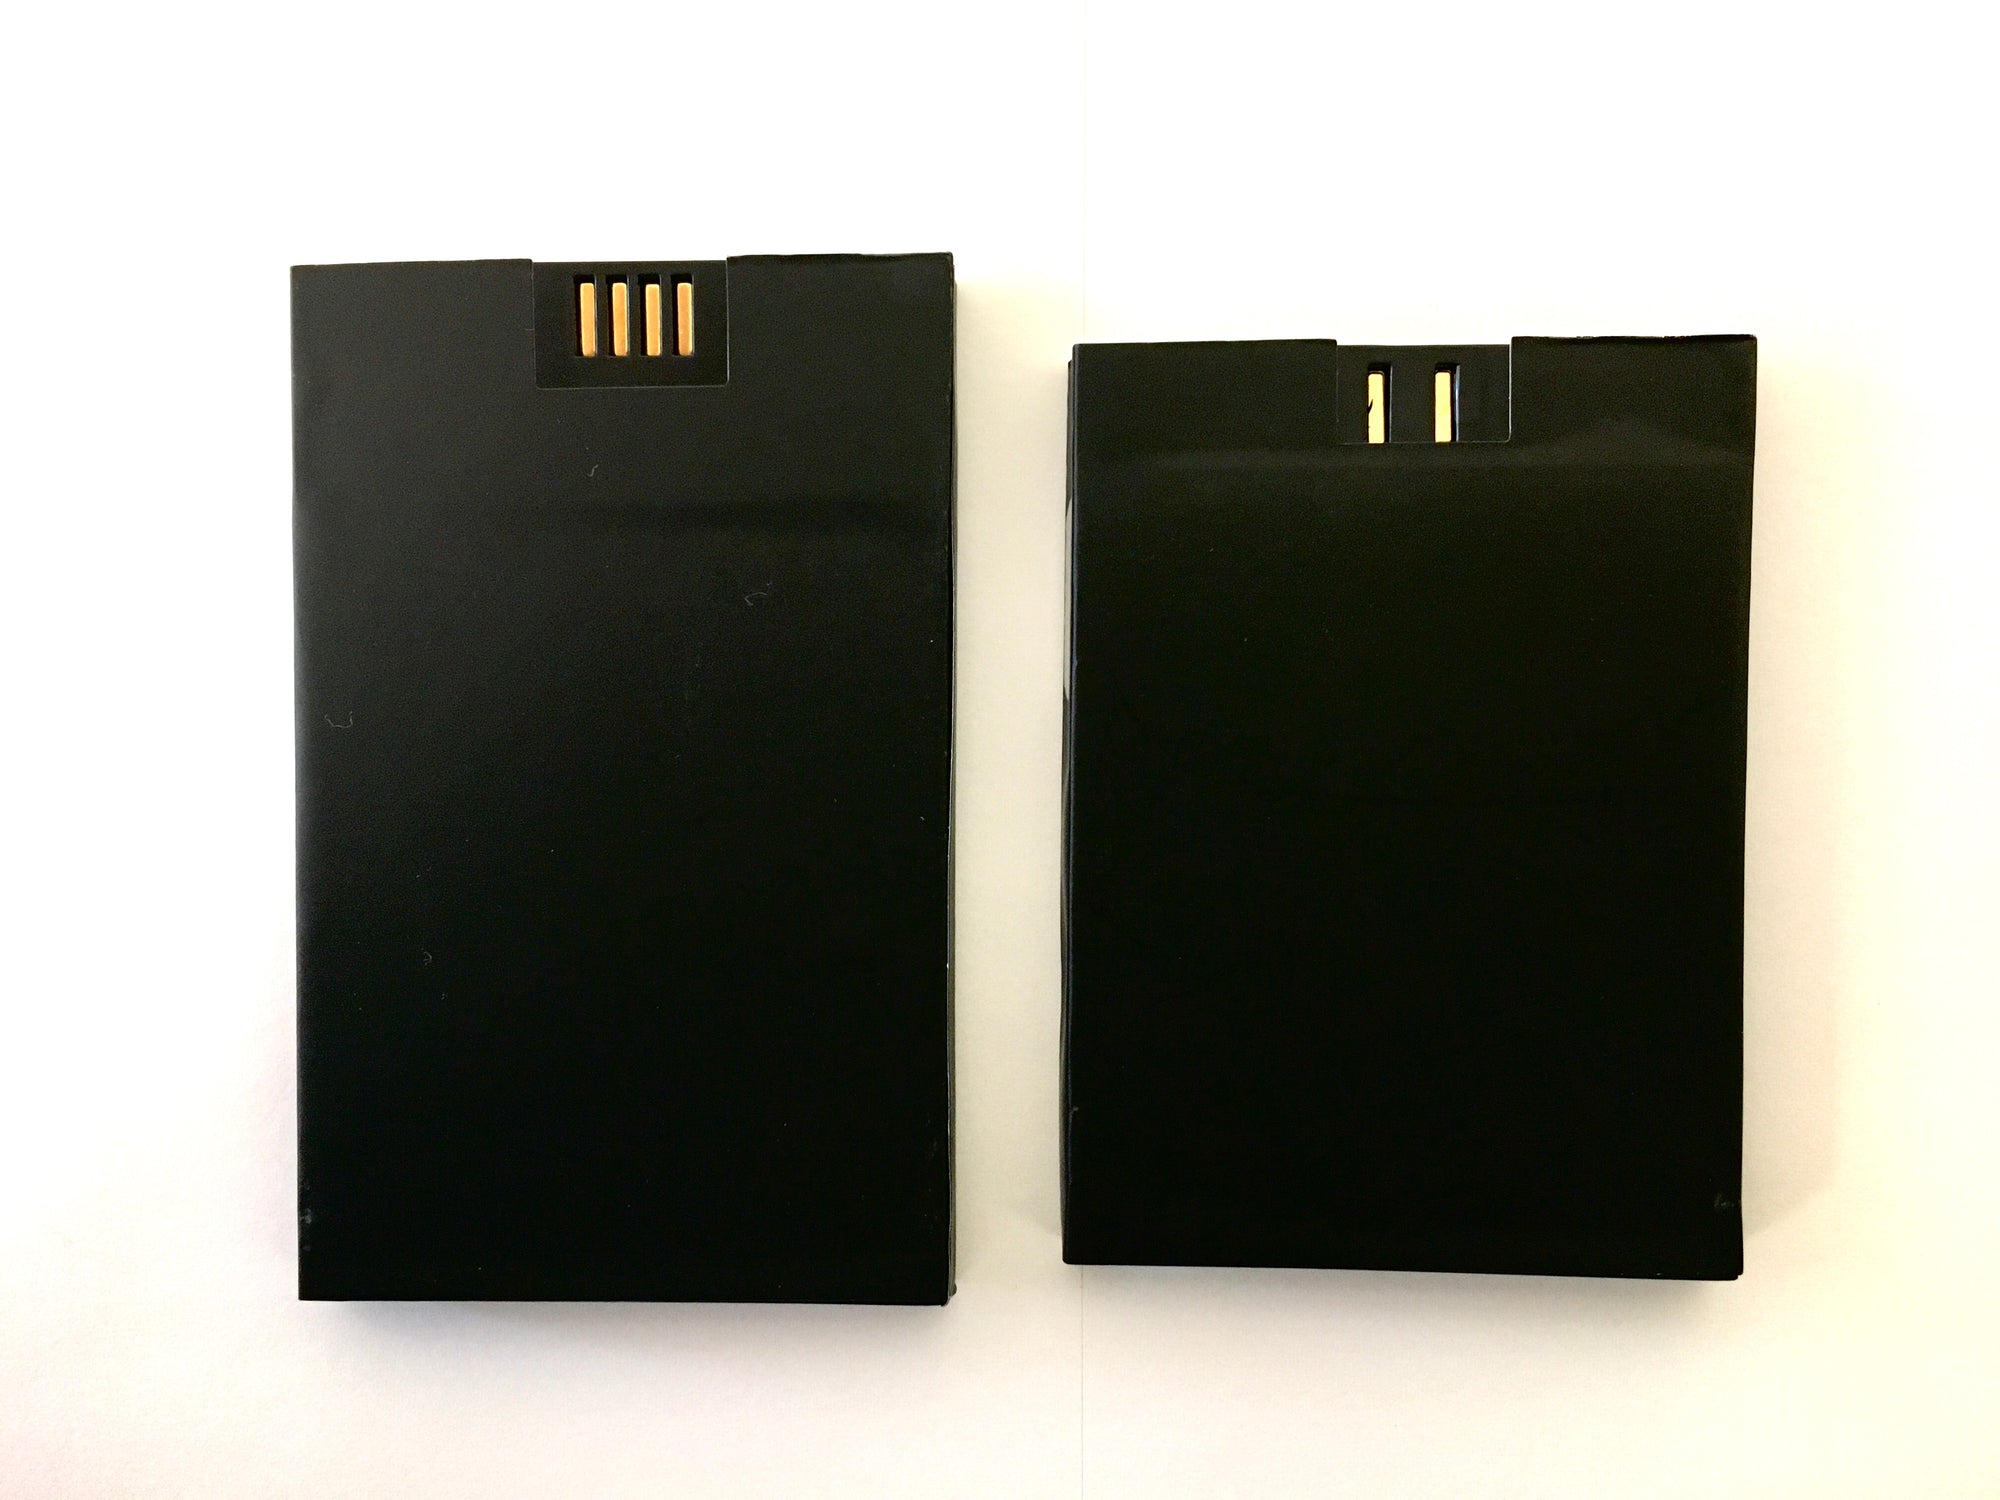 Rechargeable Li-ion Battery for Tivax TV HiRez7